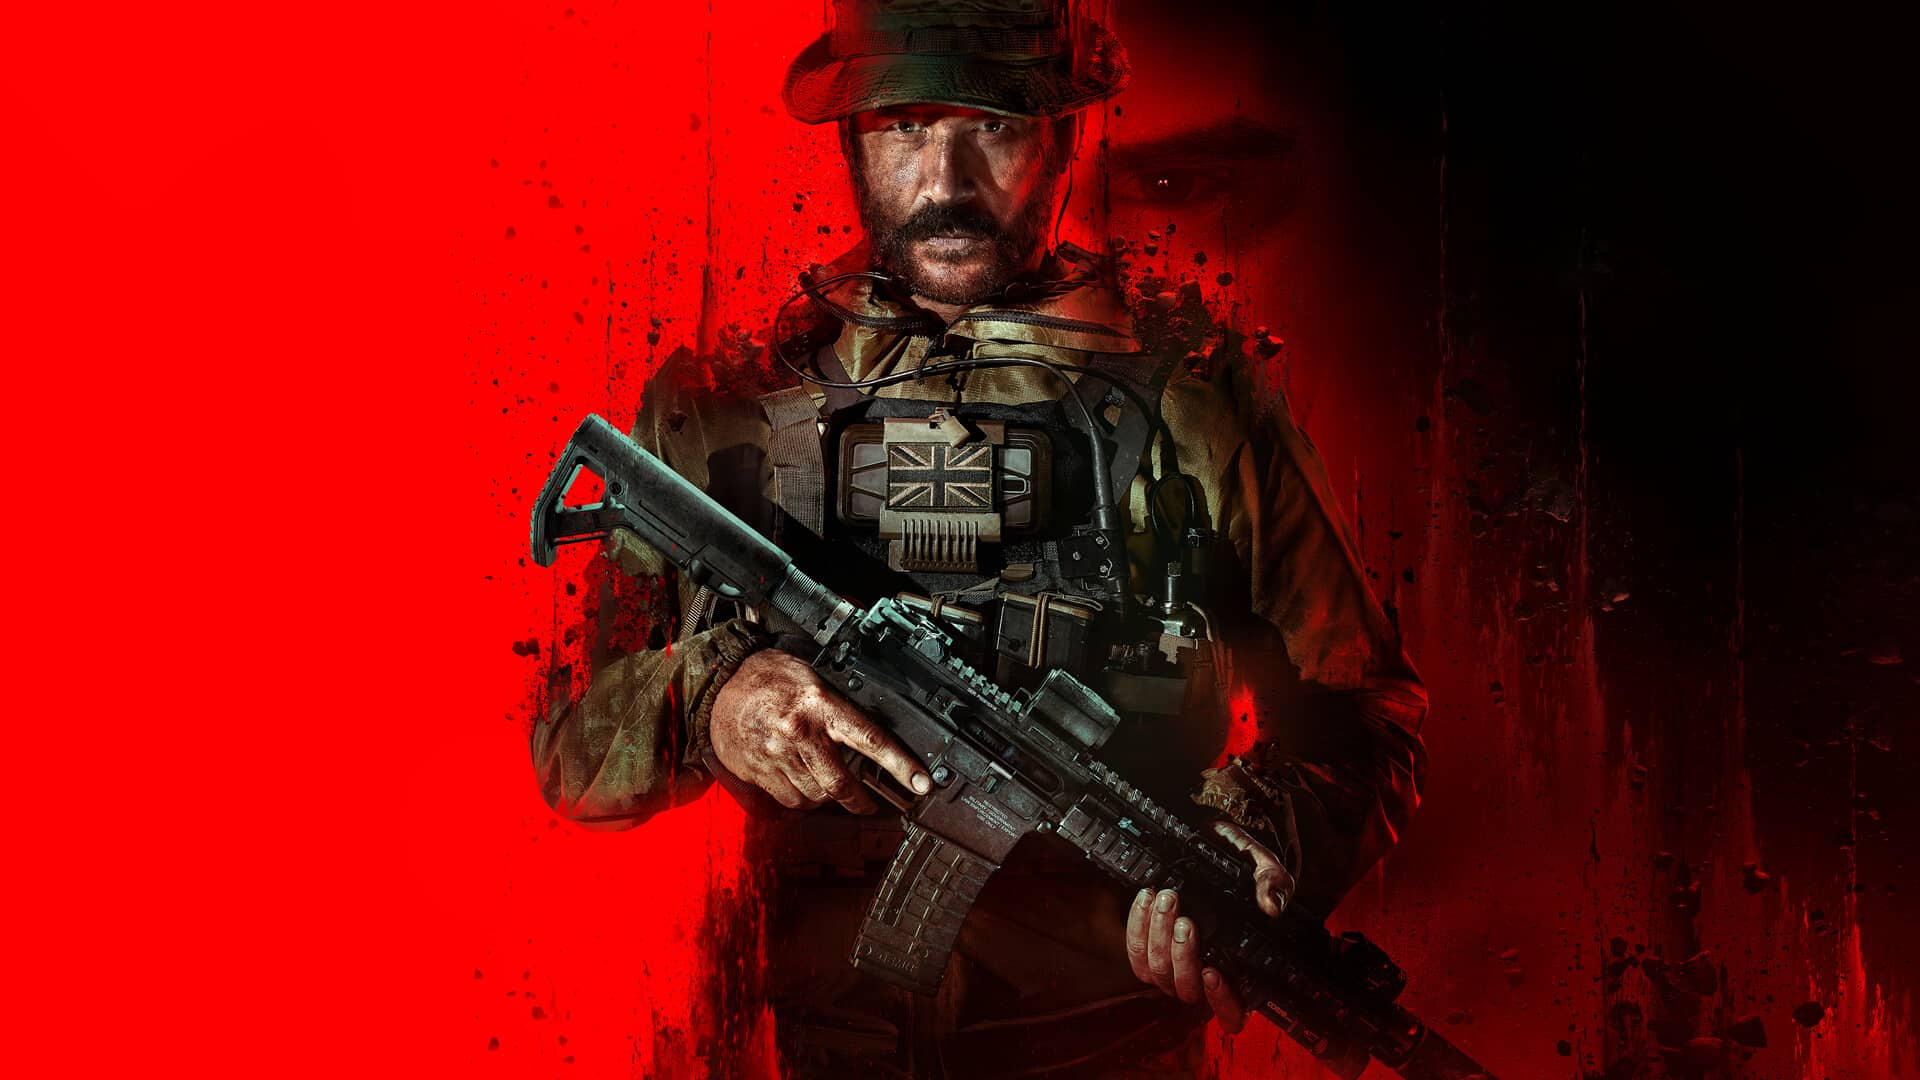 A soldier holding a gun in front of a red background.